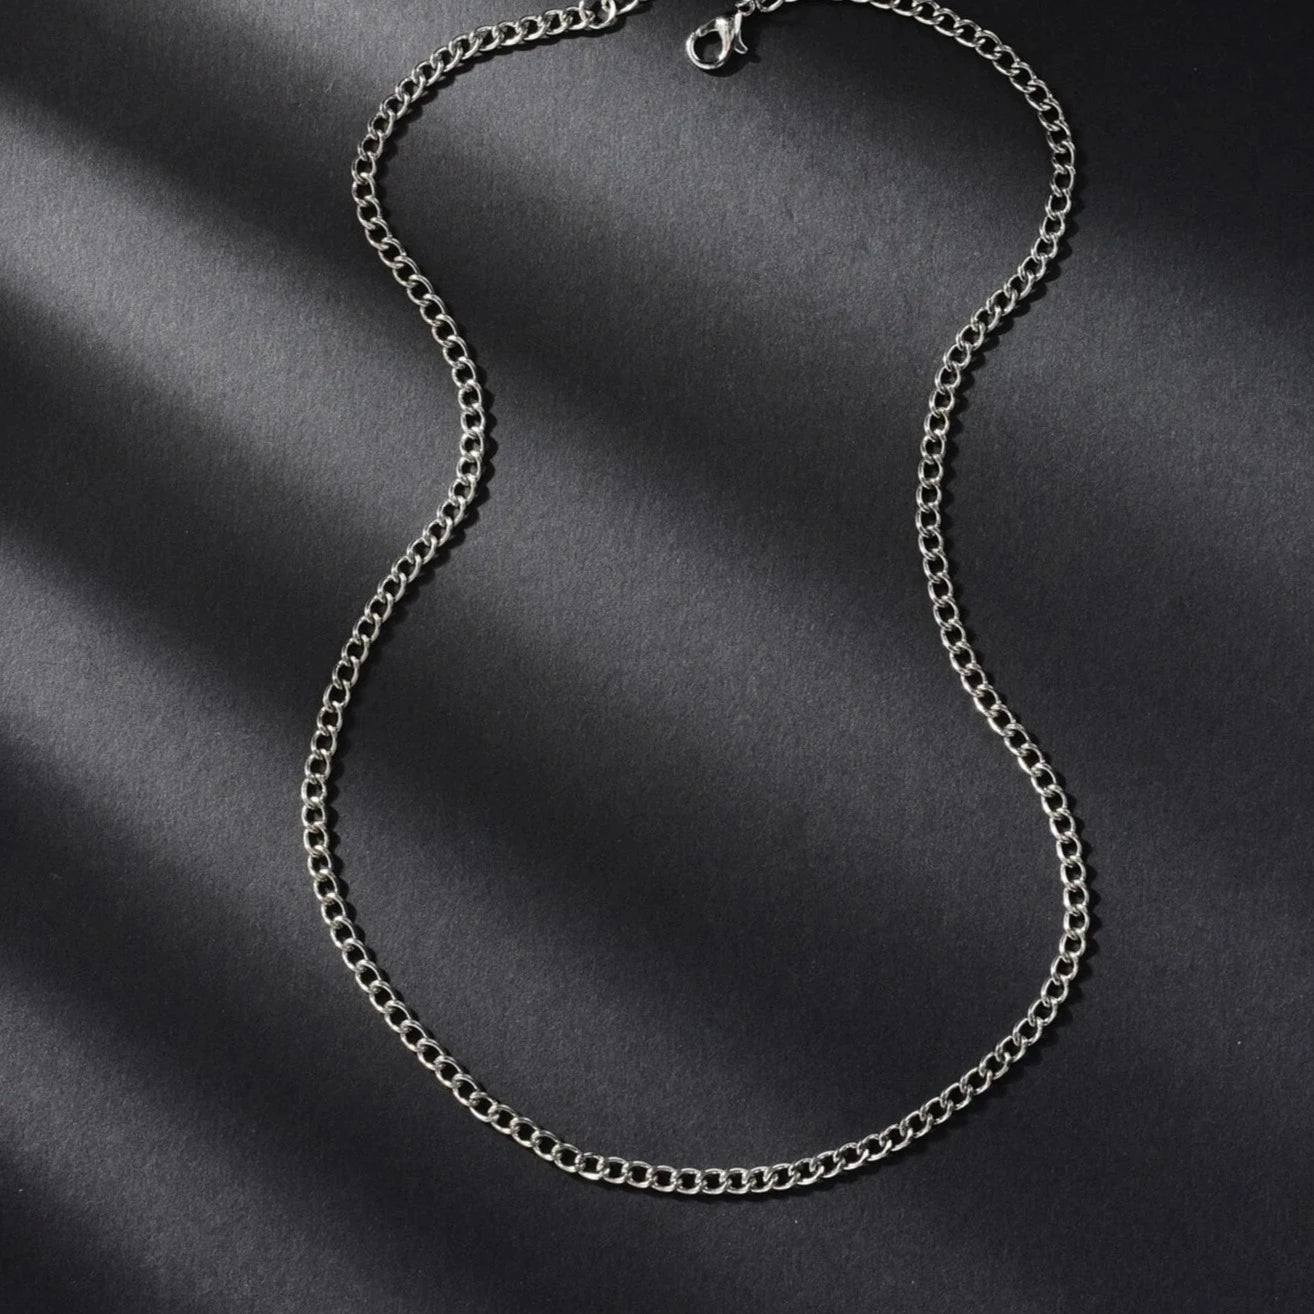 6MM STAINLESS STEEL CURB CHAIN NECKLACE - IceGlint